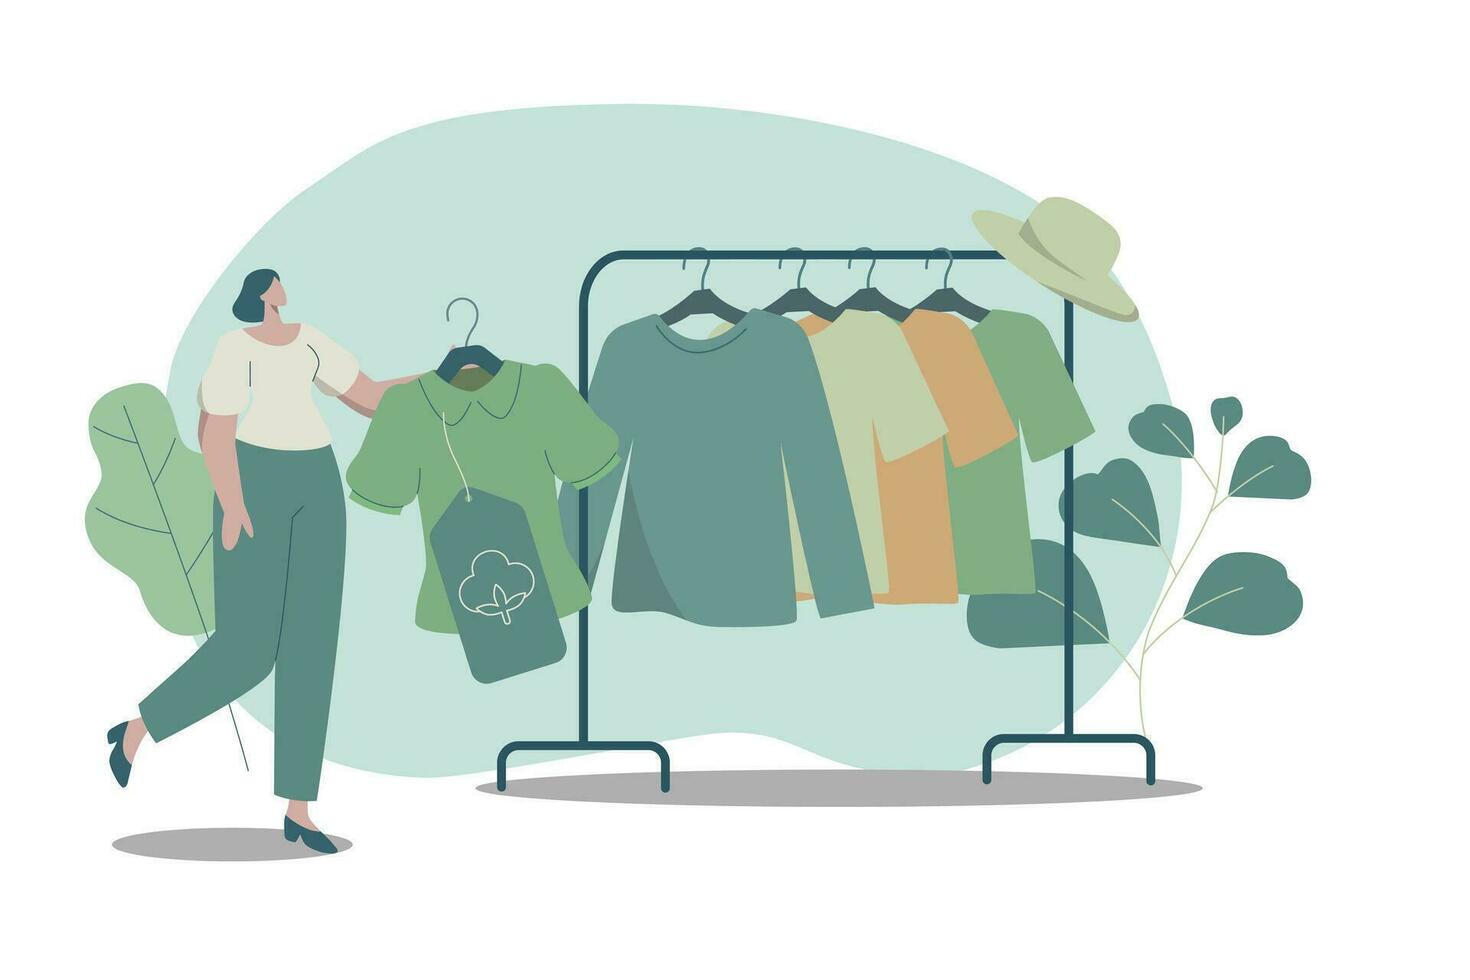 Eco friendly clothing sustainable, Woman buying recycling textile, Recycle and environmental care concept on fashion. Vector design illustration.